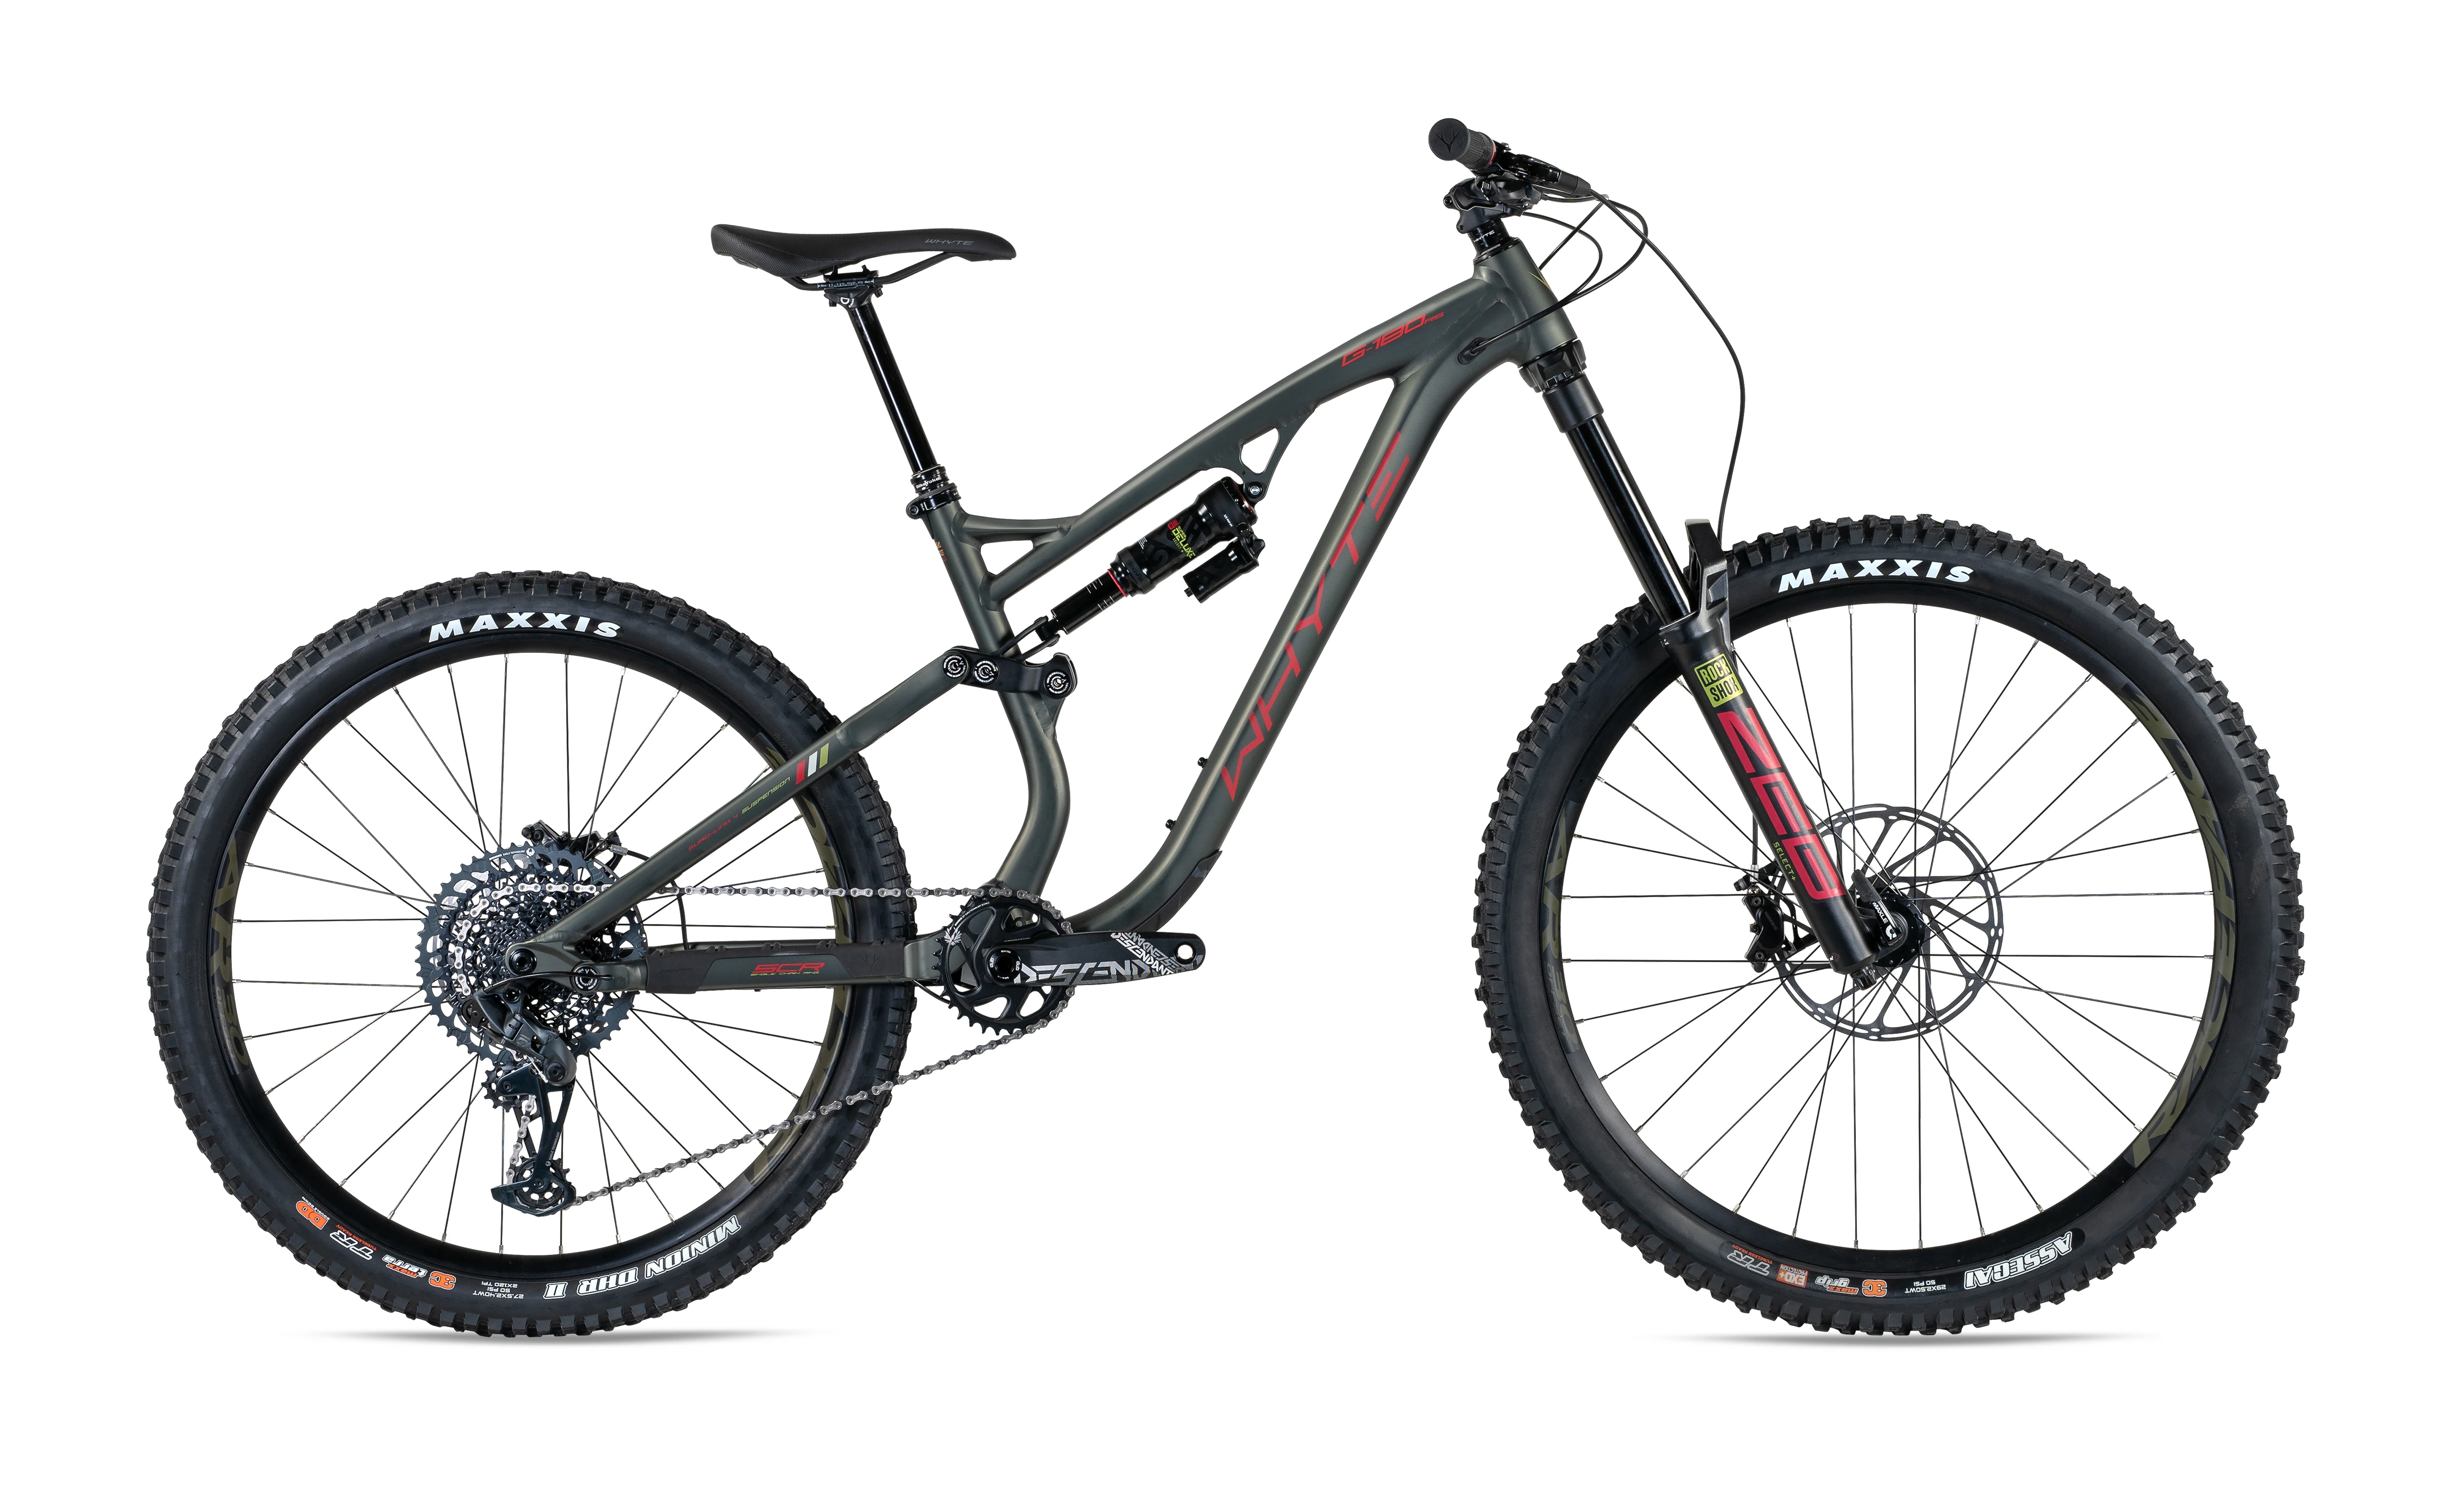 WHYTE G-180 RS Mullet